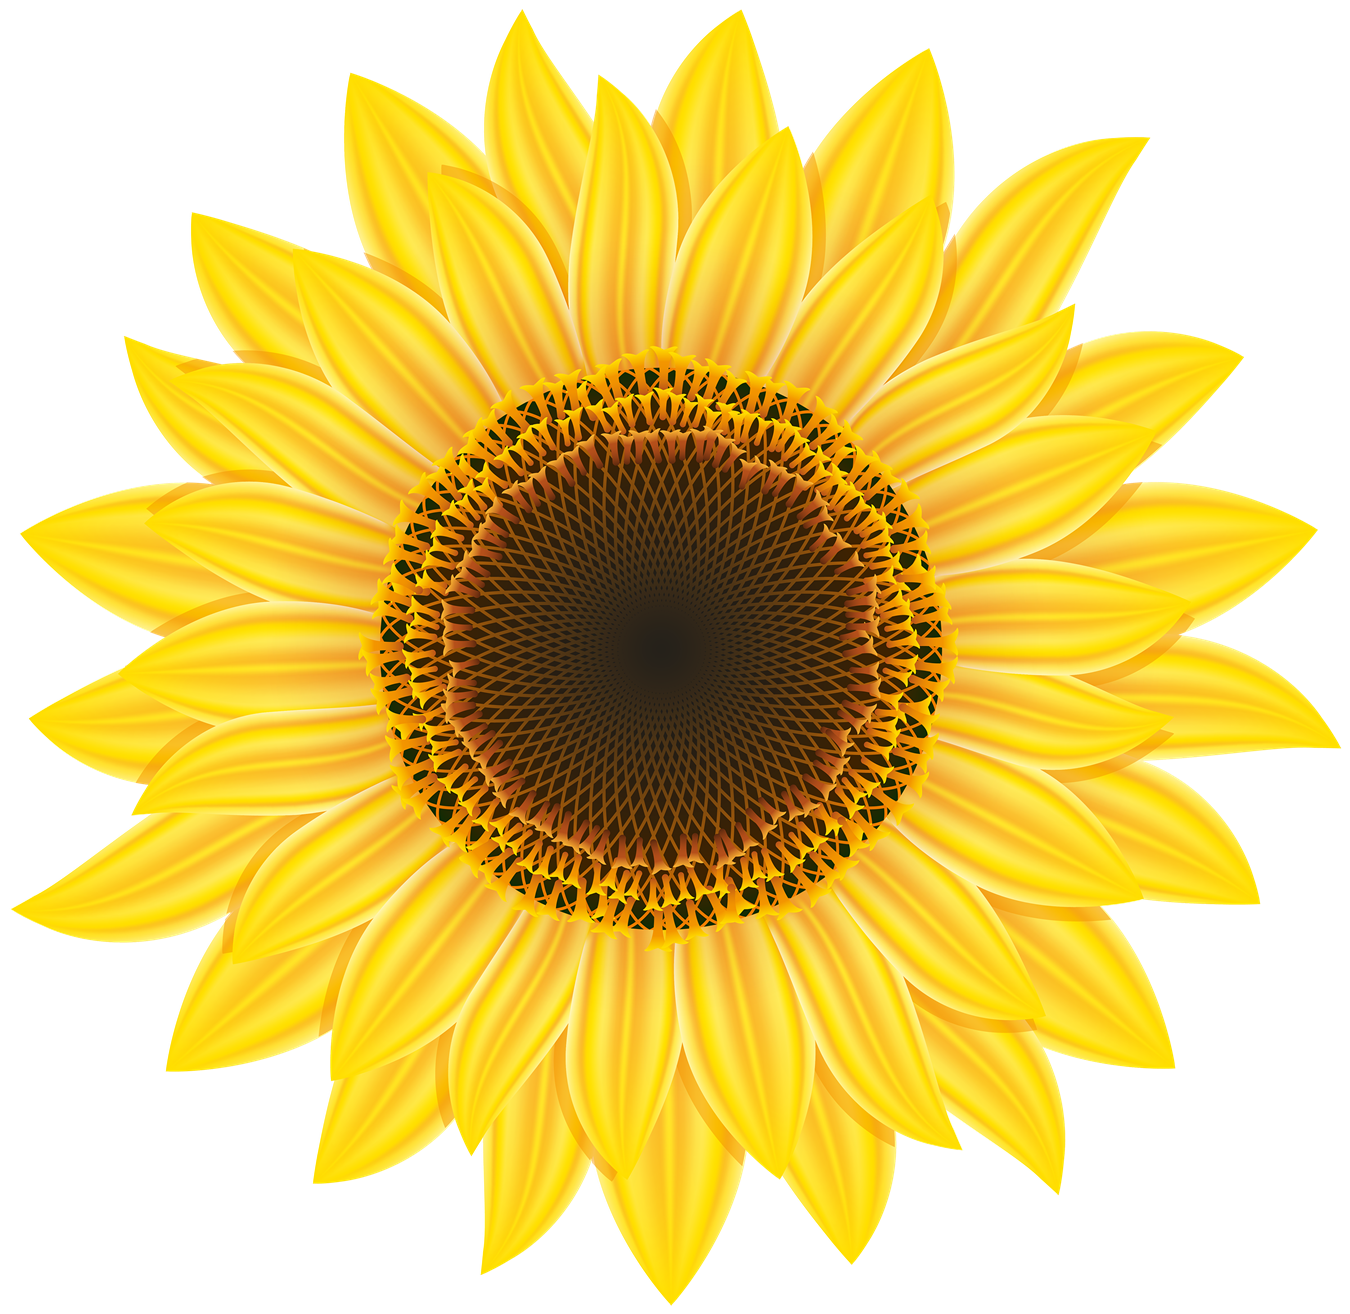 Download PNG image - Sunflower PNG Image 